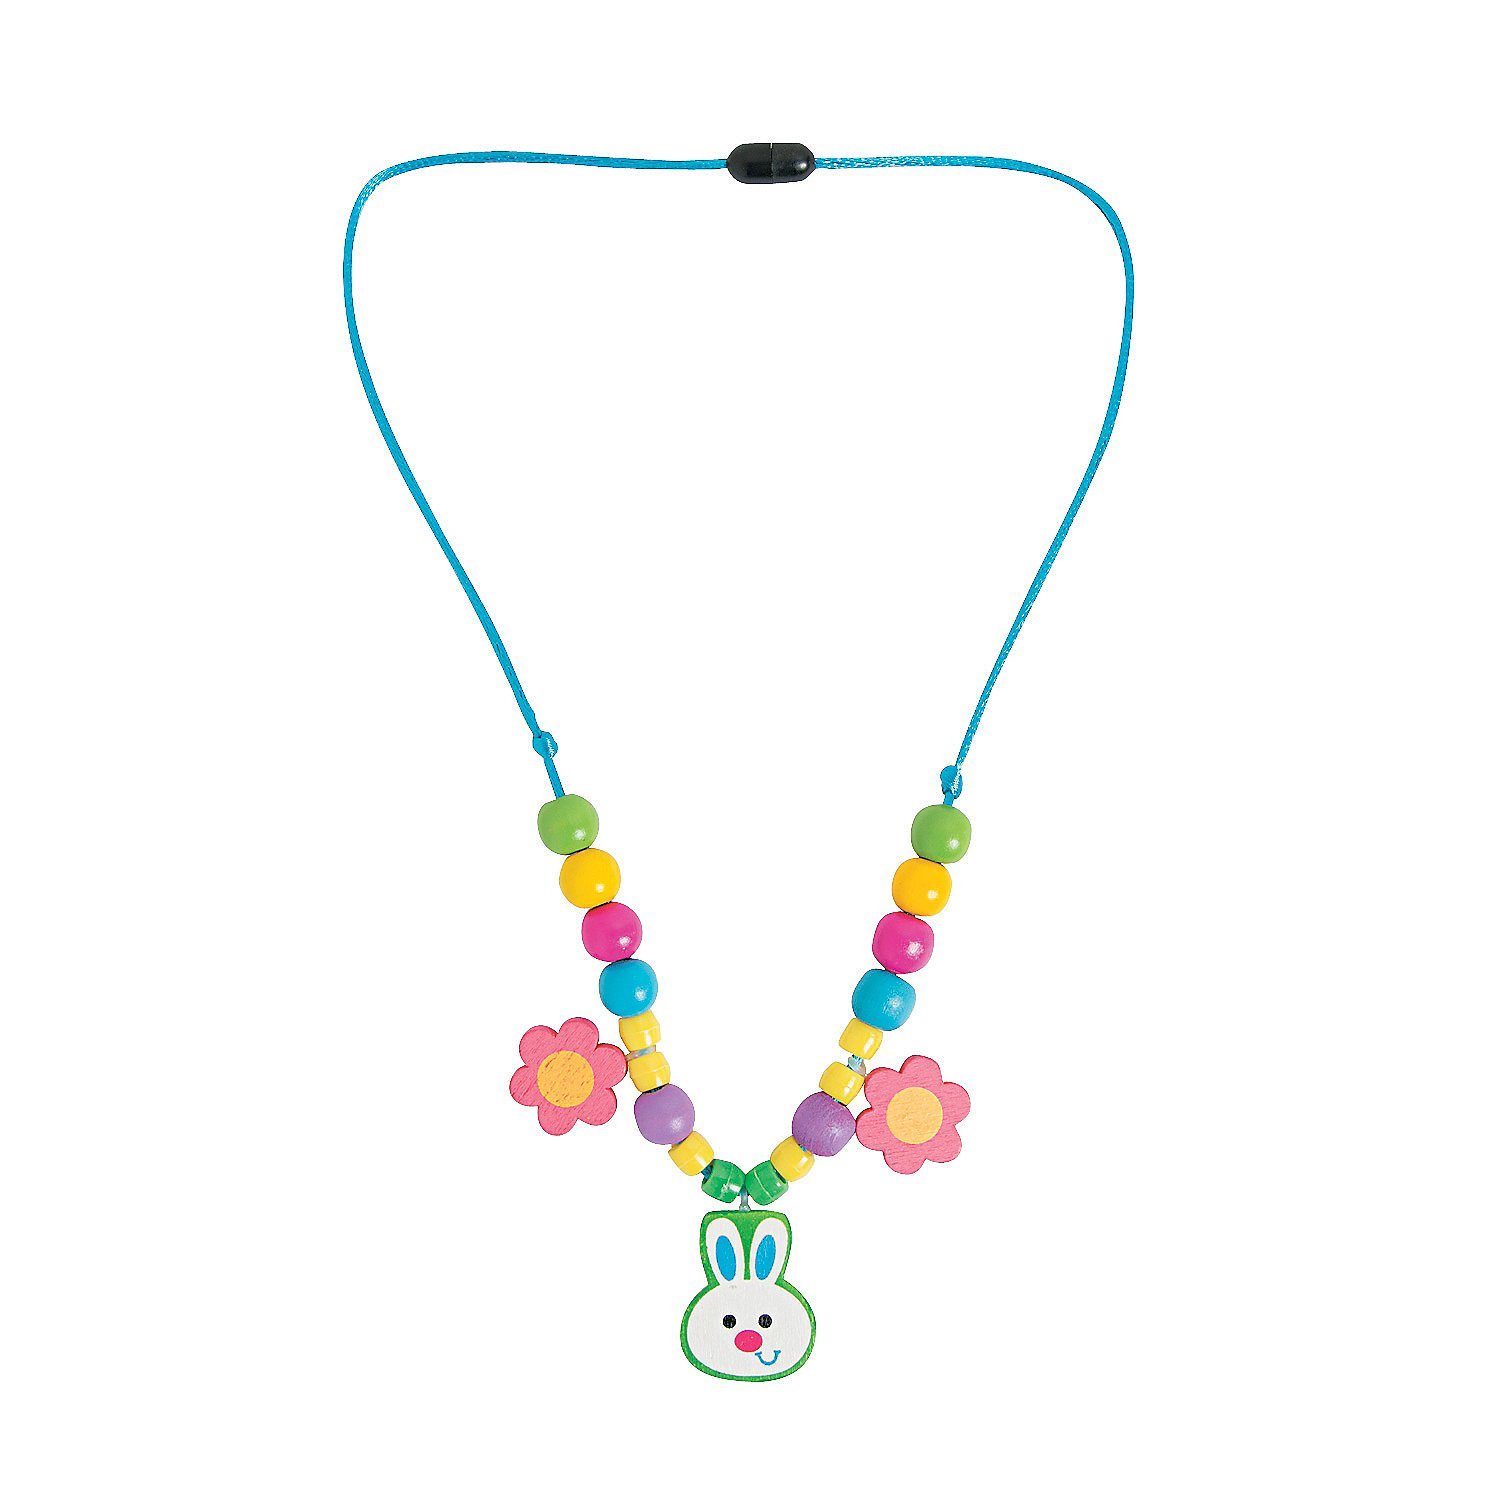 bunny jewelry necklace with colorful beads